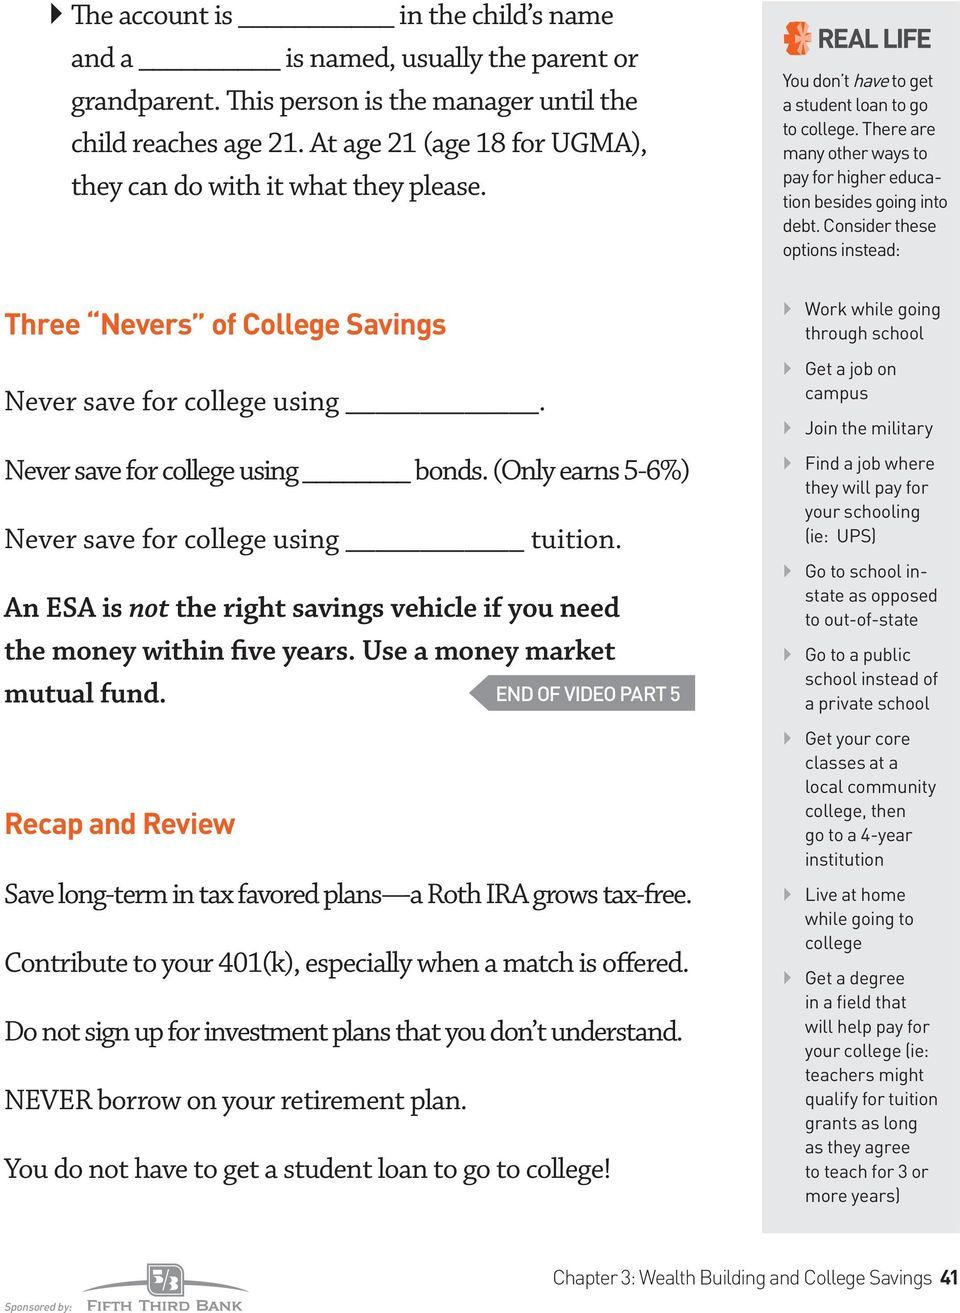 Funding 401ks And Roth Iras Worksheet Answers Quizlet